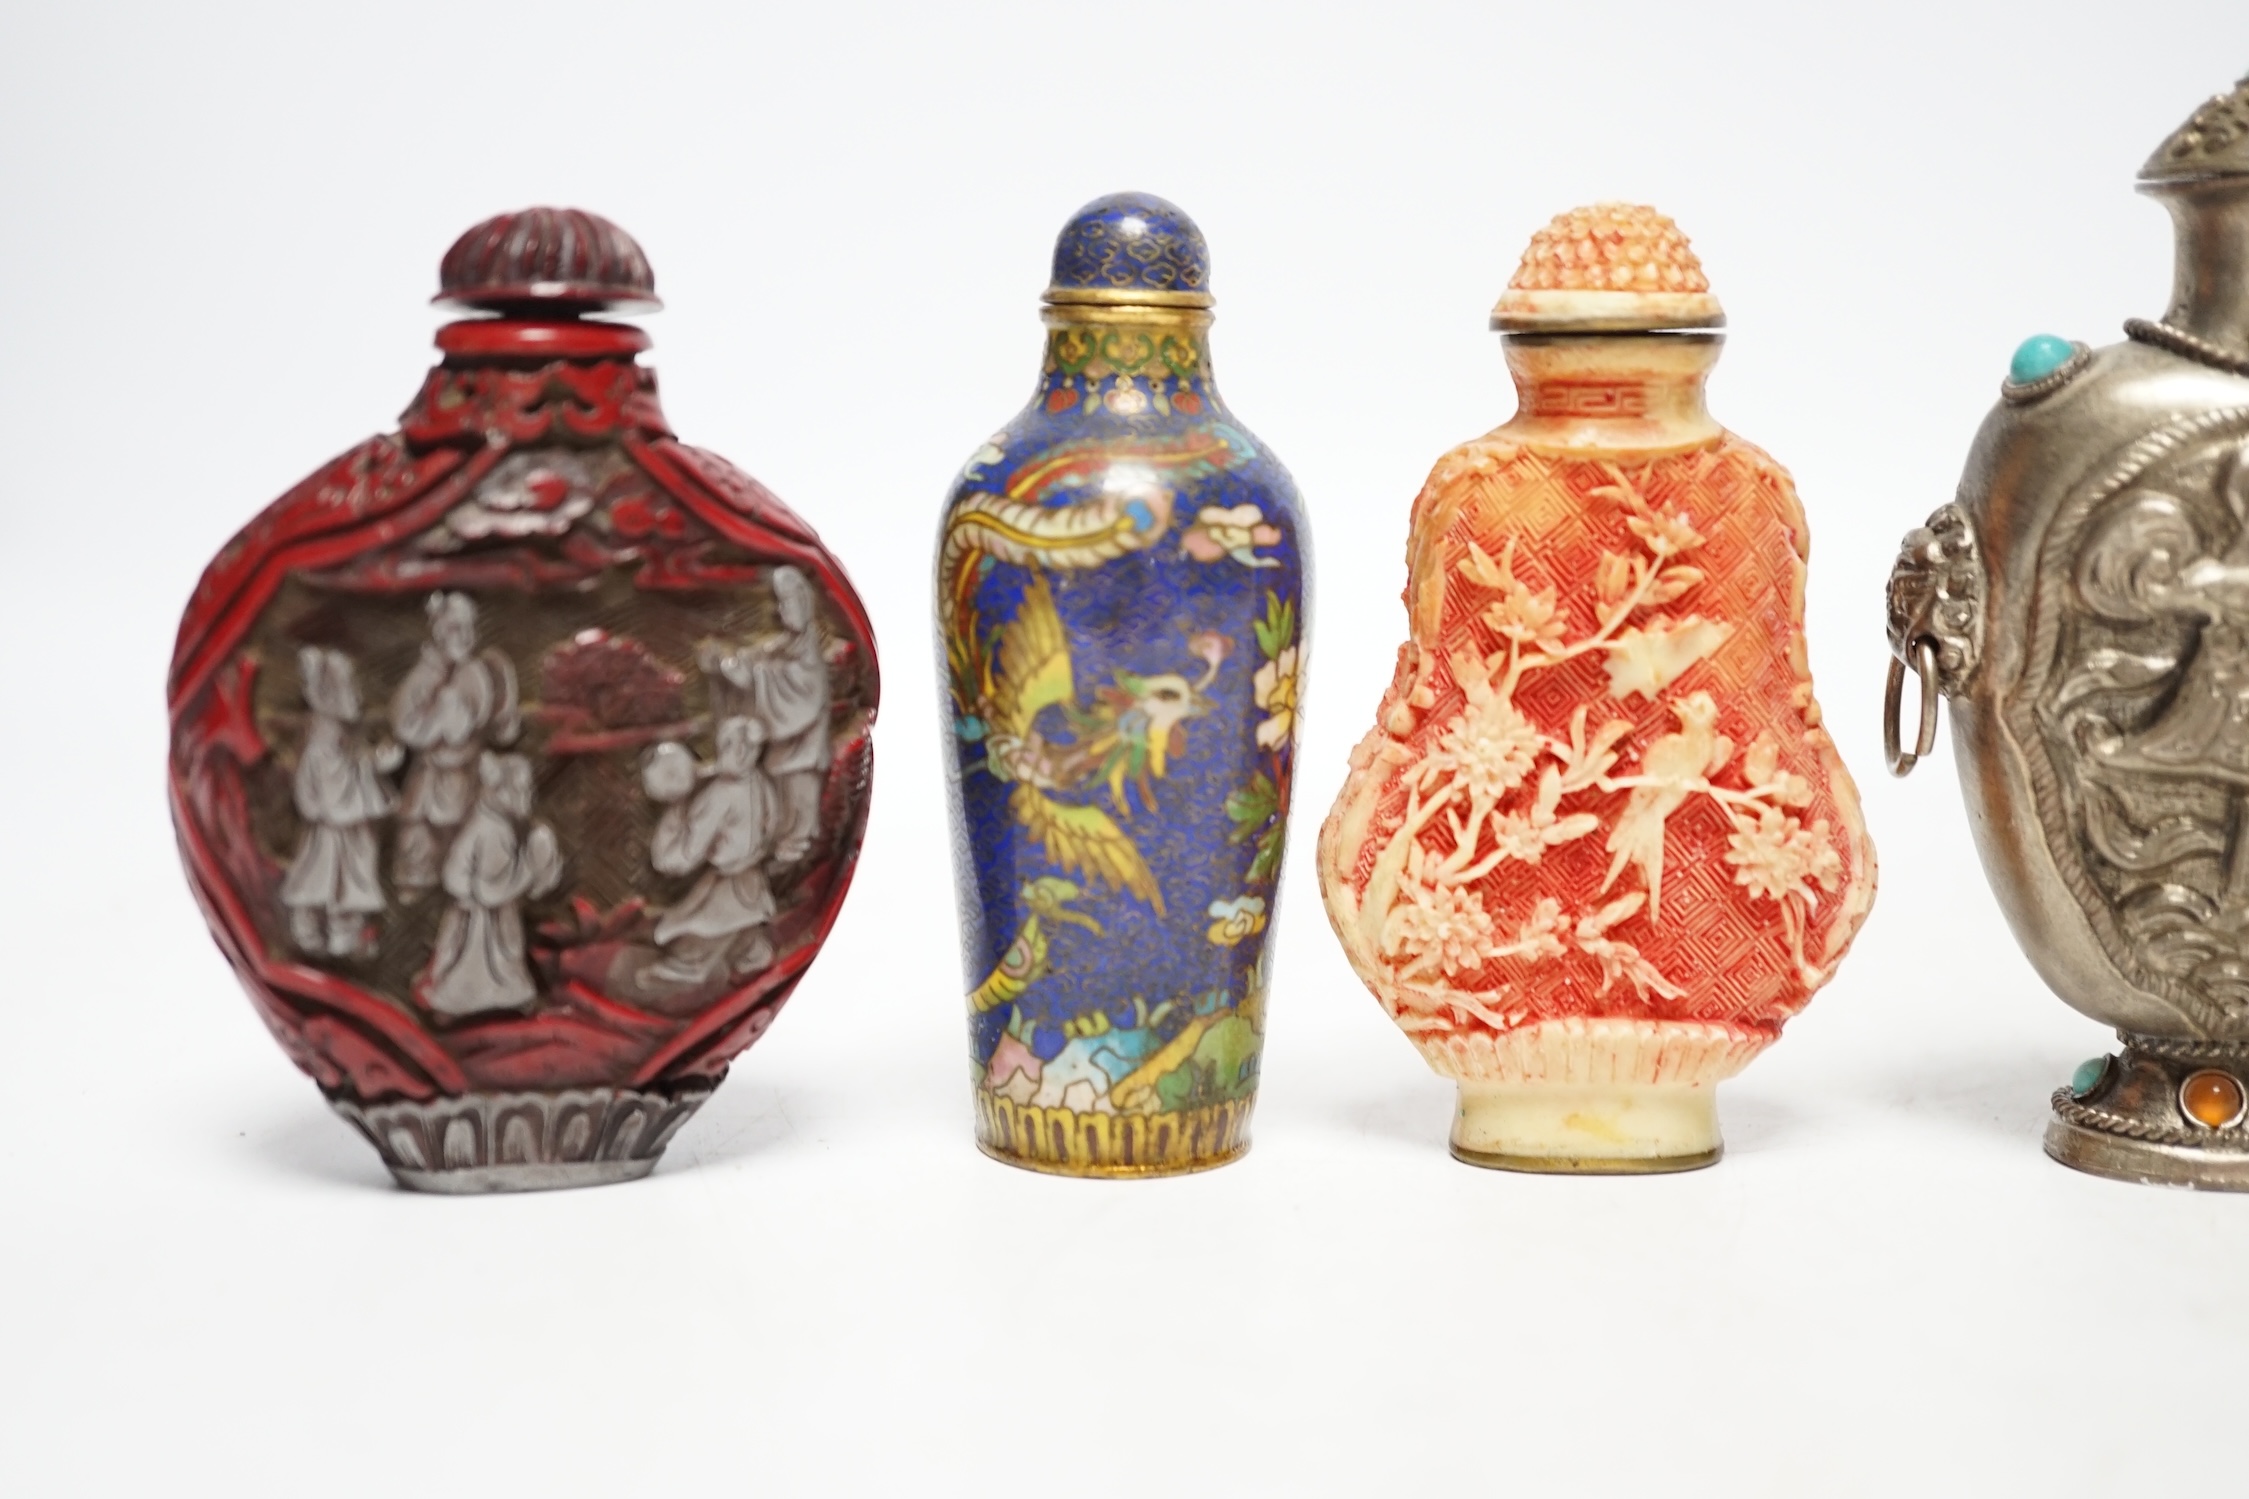 A Chinese cloisonné enamel snuff bottle, two resin snuff bottles, a carved mother of pearl snuff bottle and a Tibetan style metal snuff bottle, largest 8.5cm high